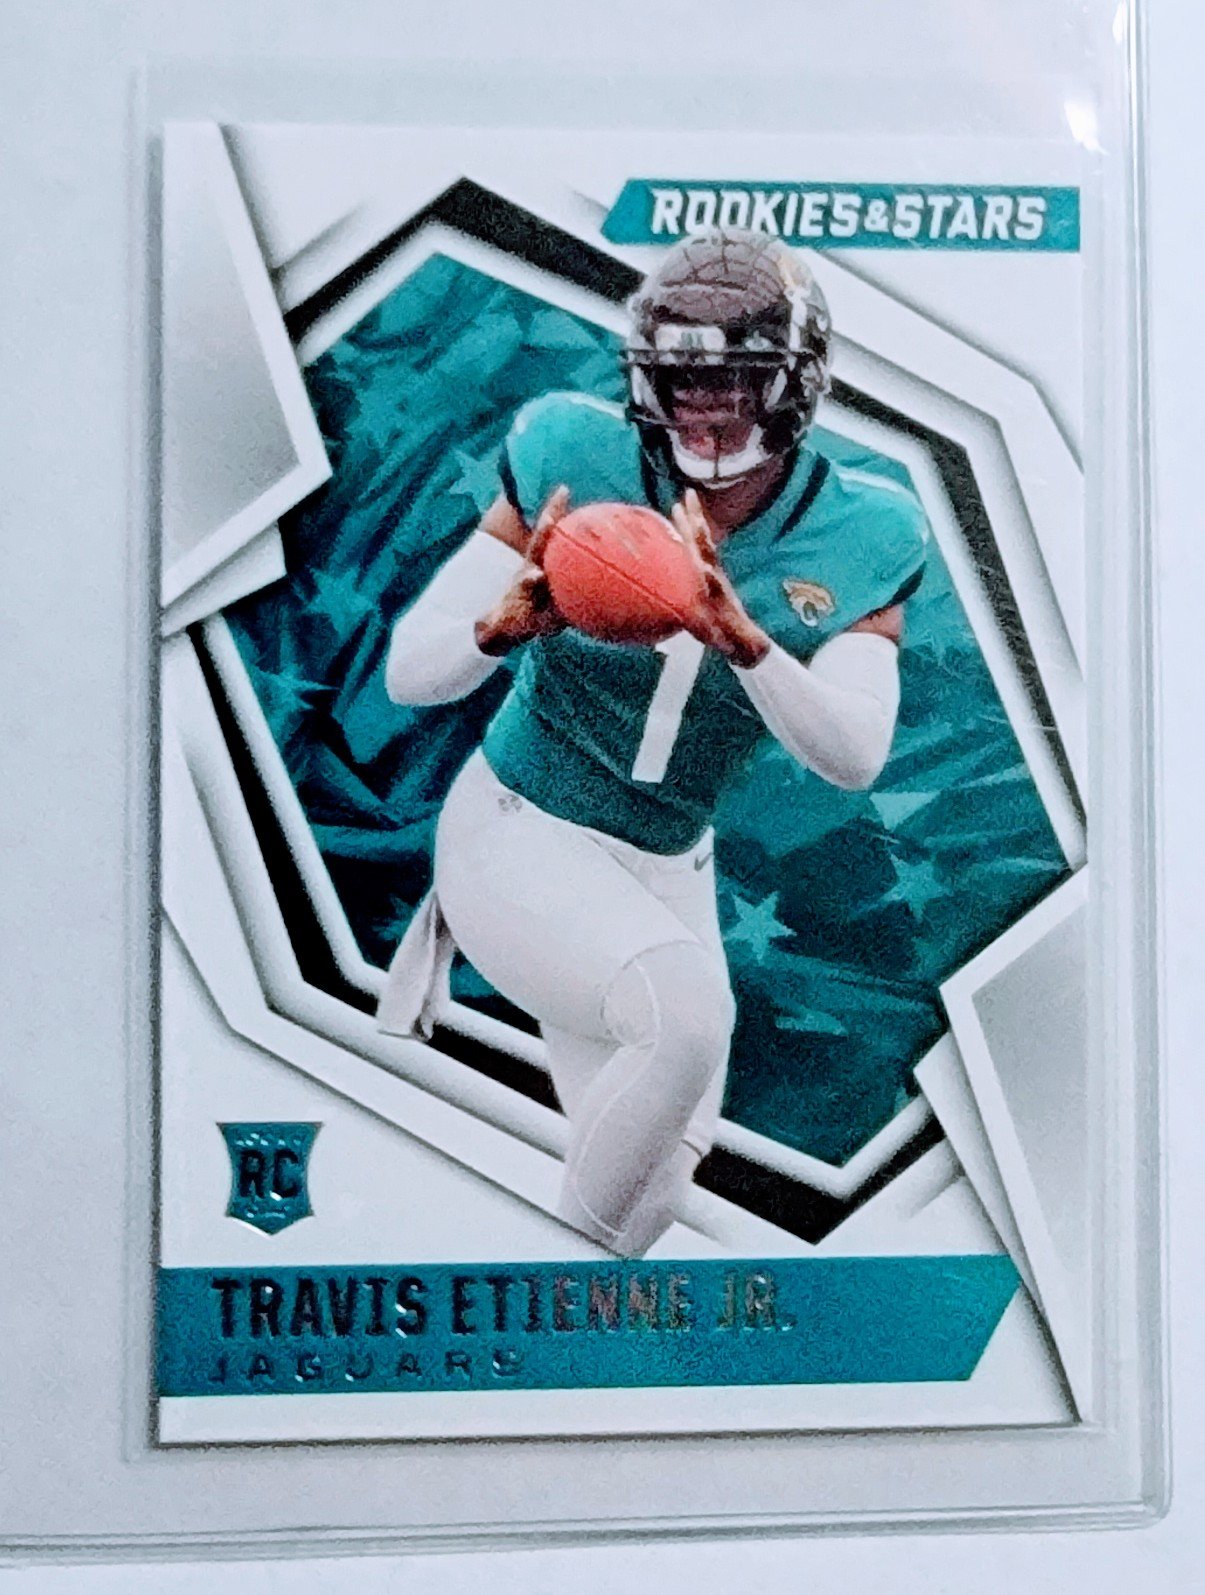 2021 Panini Rookies and Stars Travis Etienne Jr Rookie Football Card AVM1 simple Xclusive Collectibles   